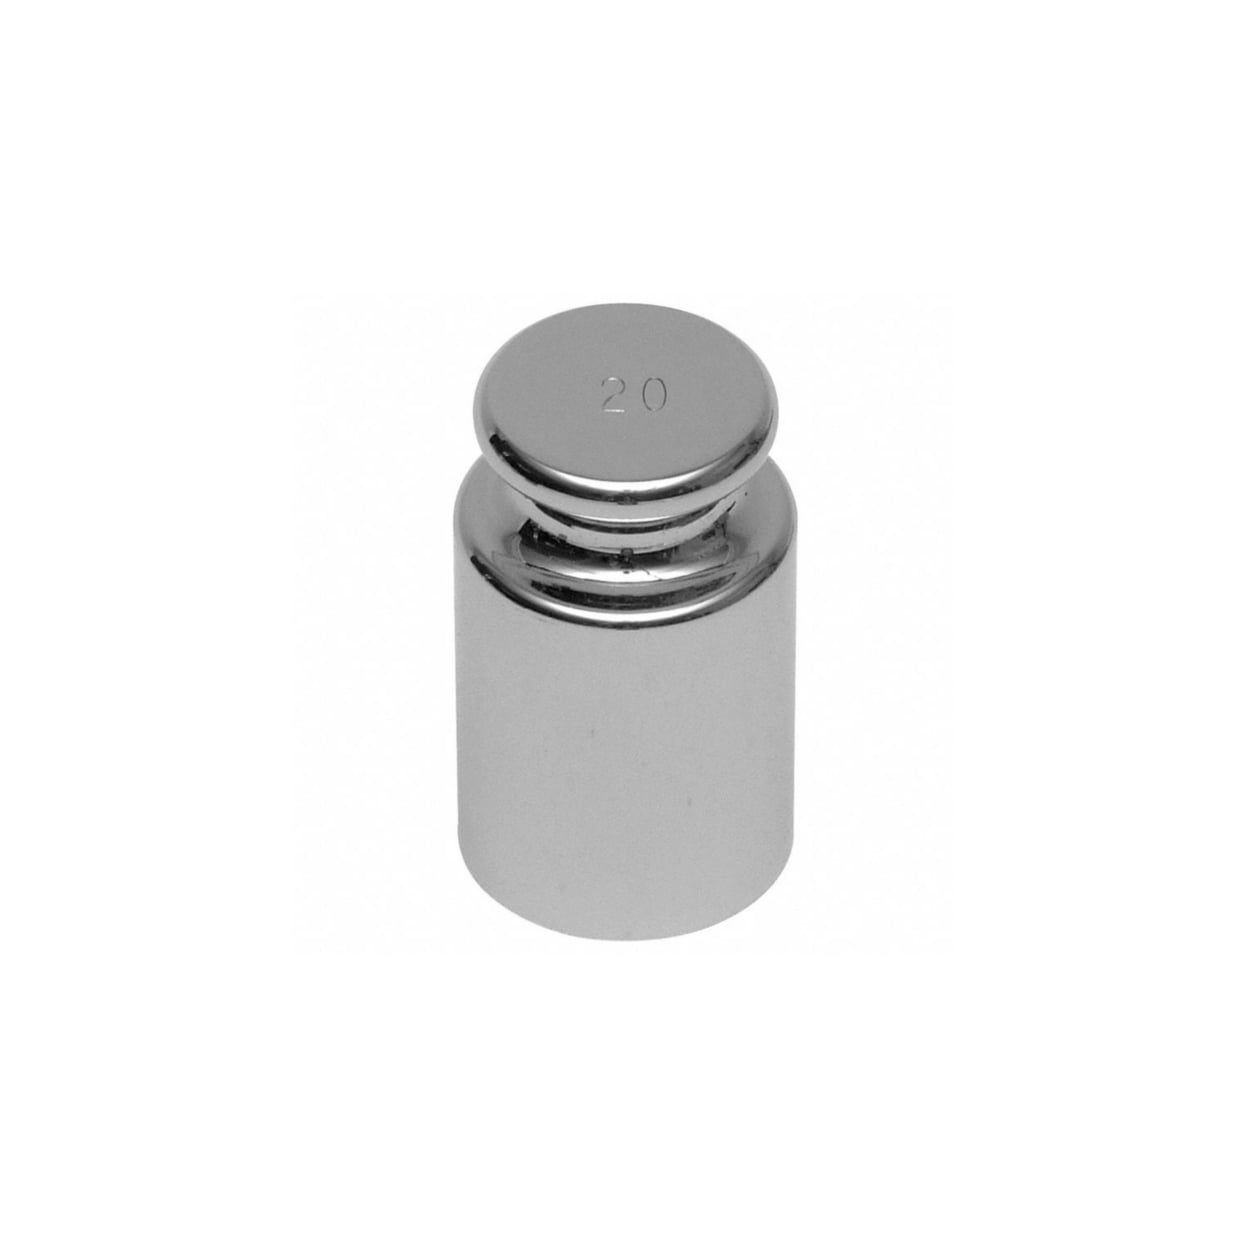 uxcell Gram Calibration Weight 50g M1 Precision Chrome Plated Steel for Digital Balance Scales 